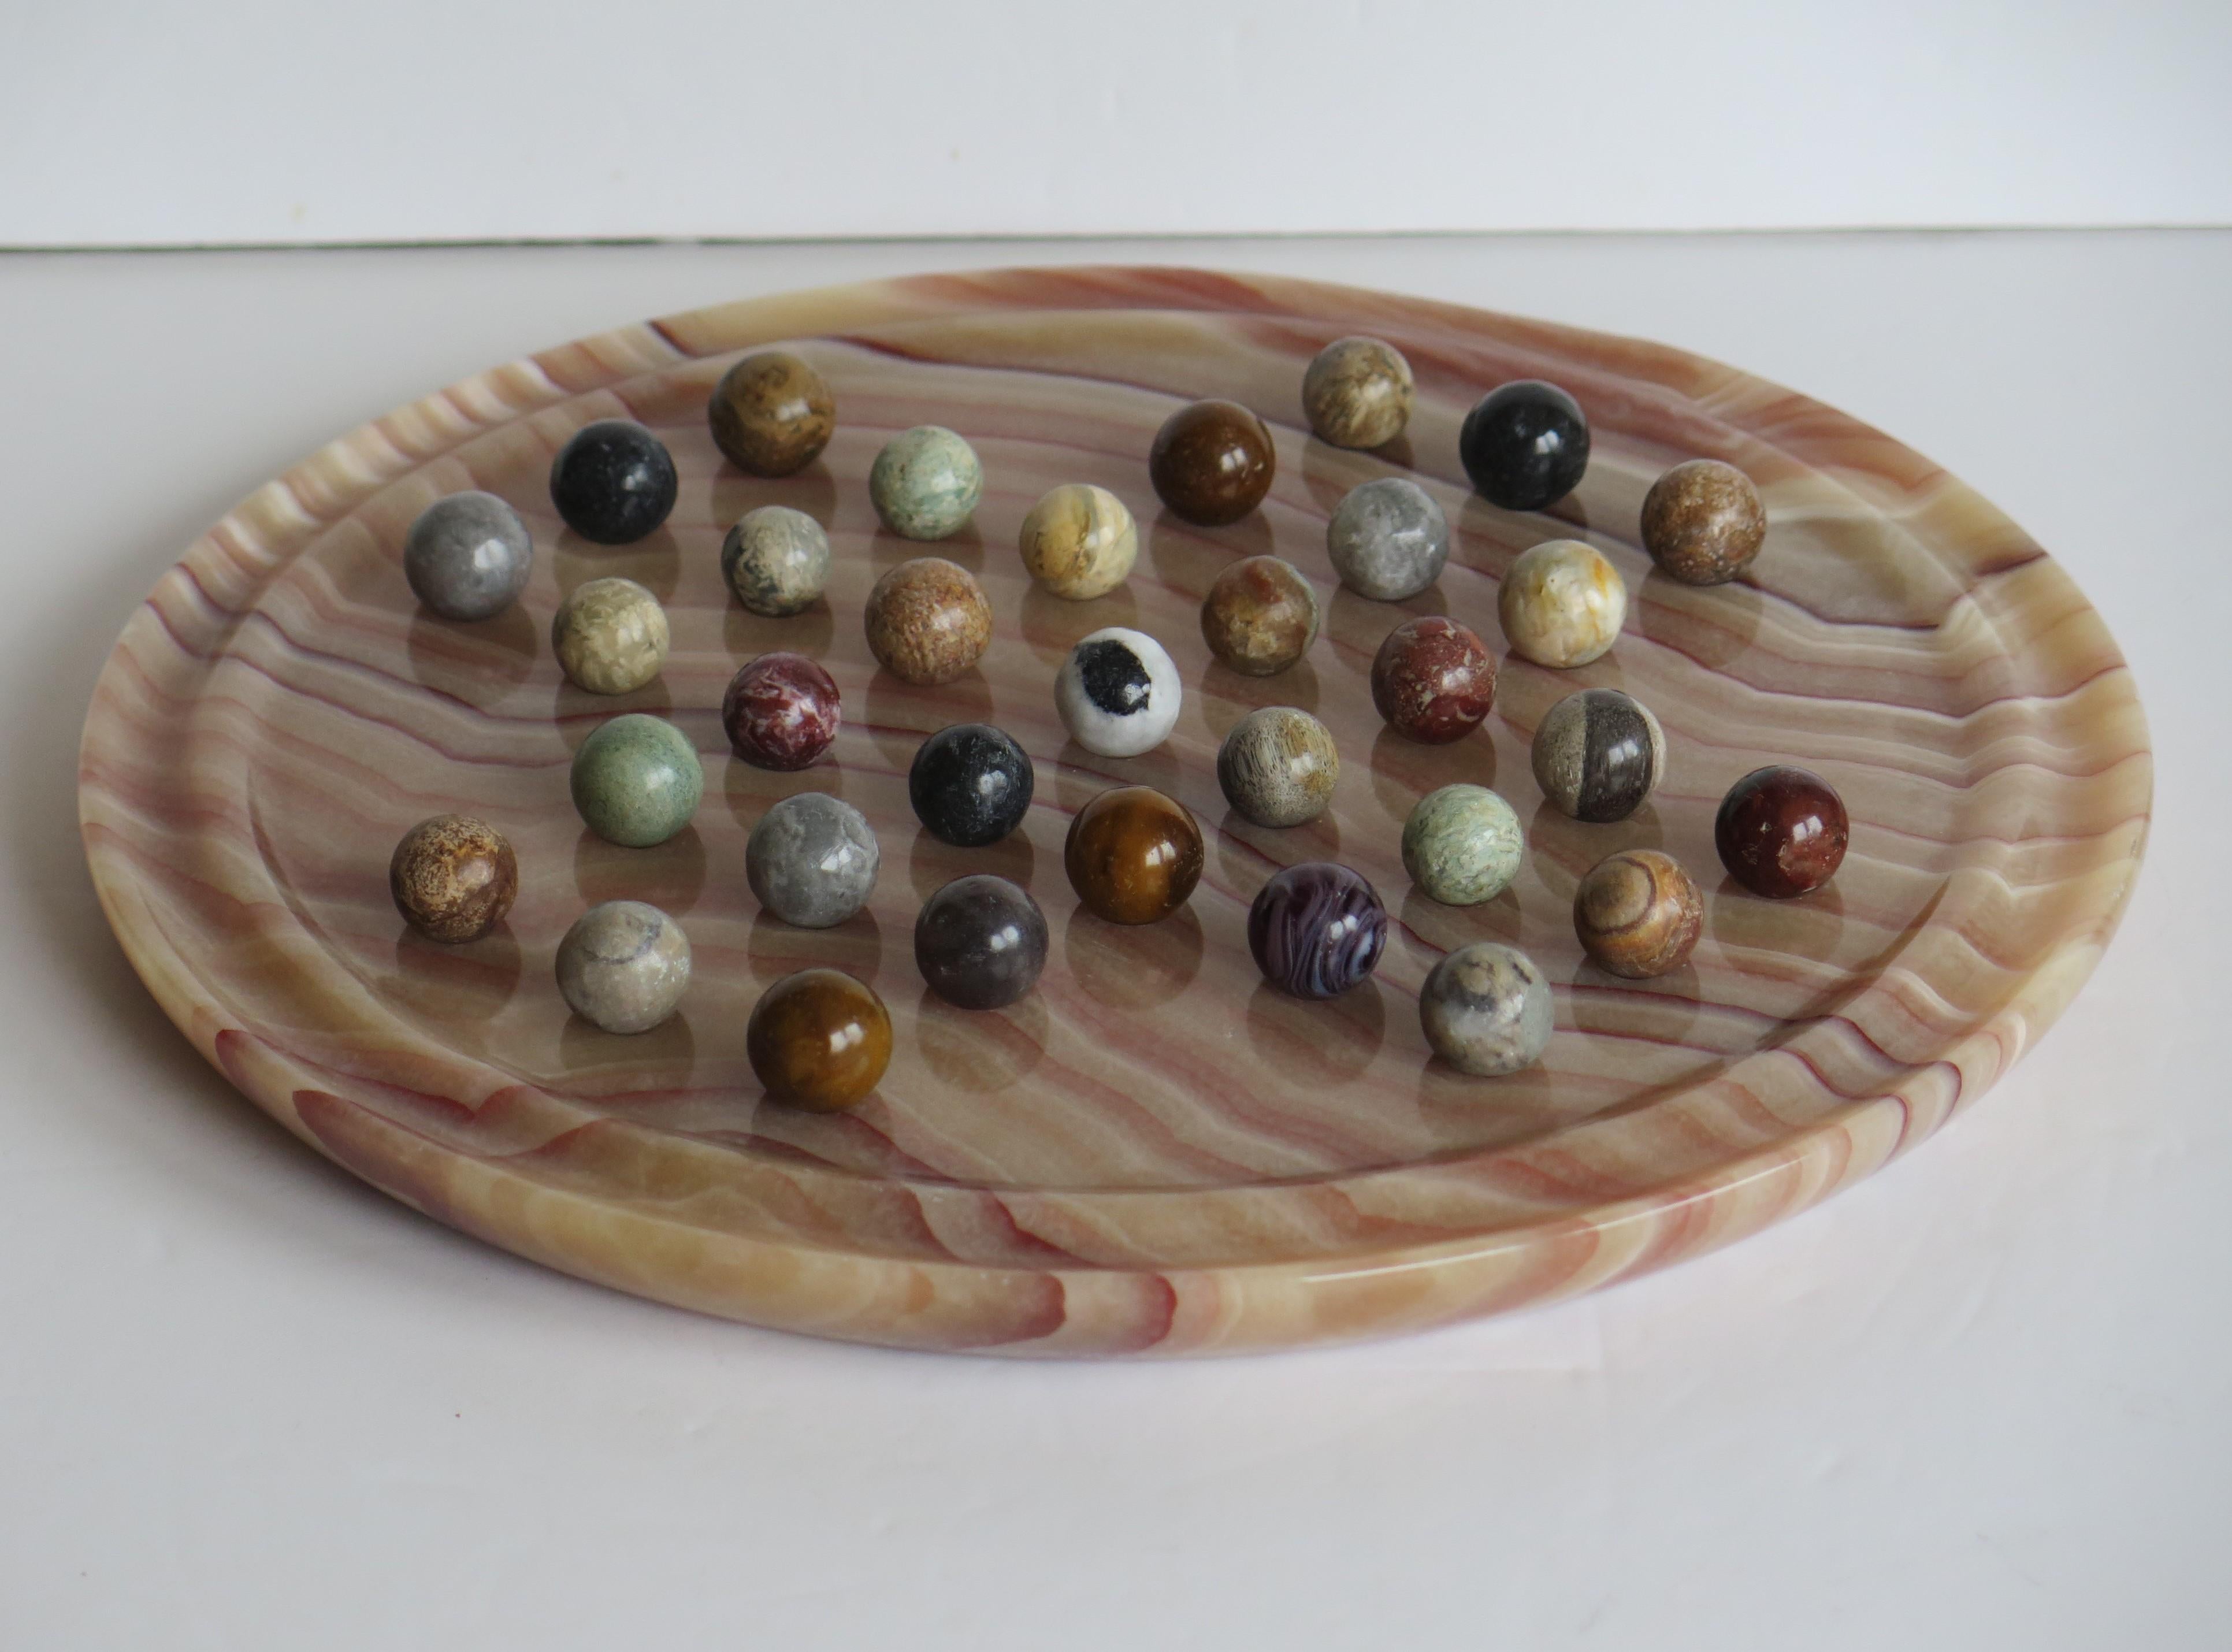 This is a complete board game of marble solitaire with a beautiful marble stone board and 33 agate mineral stone marbles all dating to the mid-20th century.

The board is very attractive and unusual being made of a heavy stone material with a fine